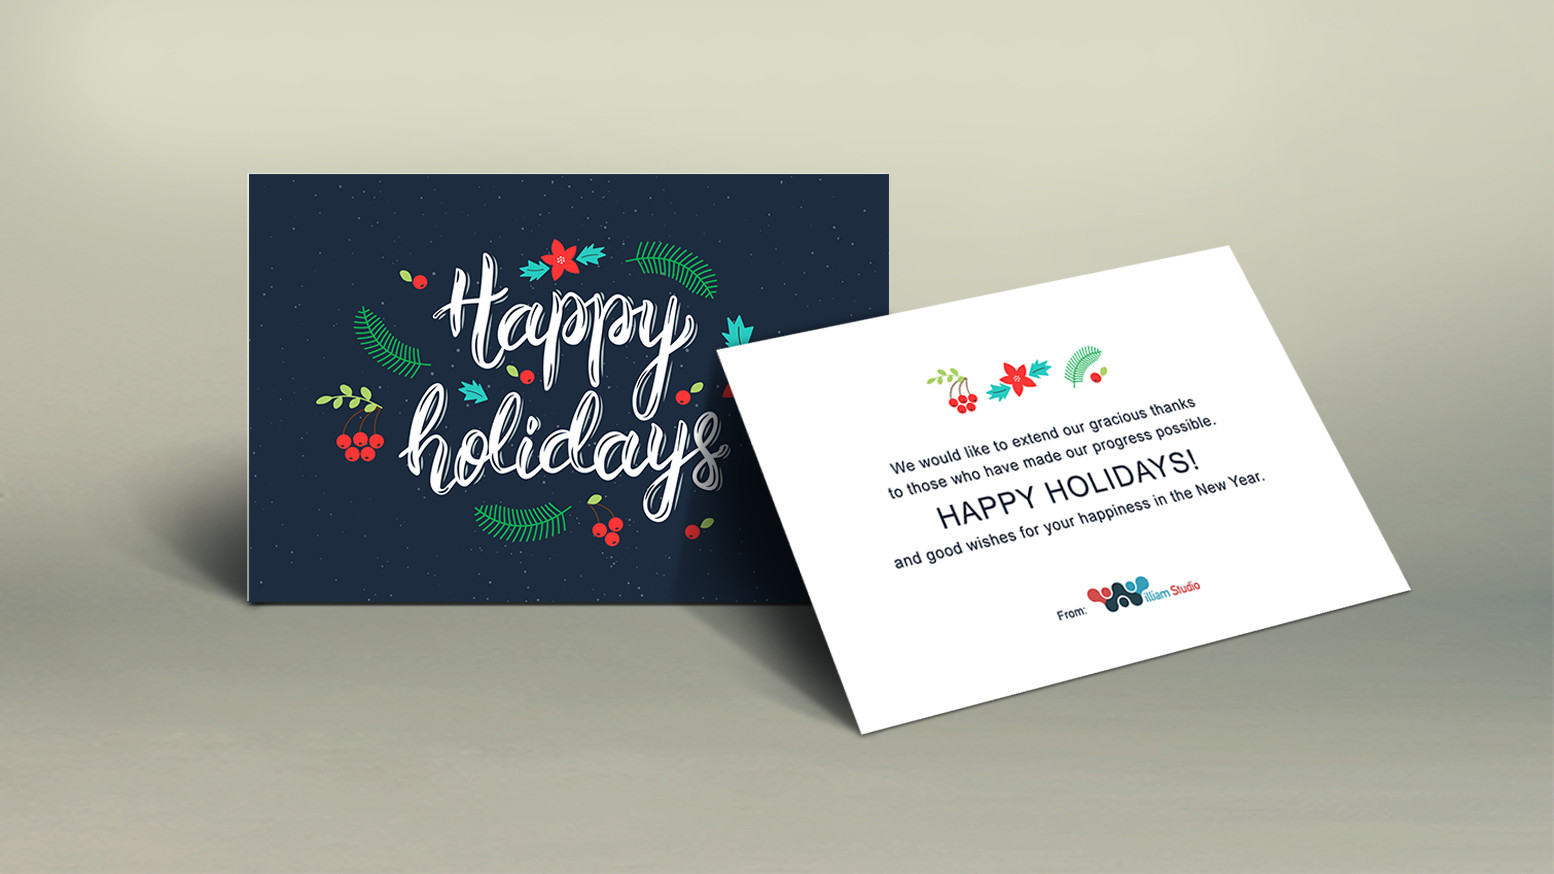 Corporate Birthday Cards
 4 Things You Need to Know About Business Greeting Cards